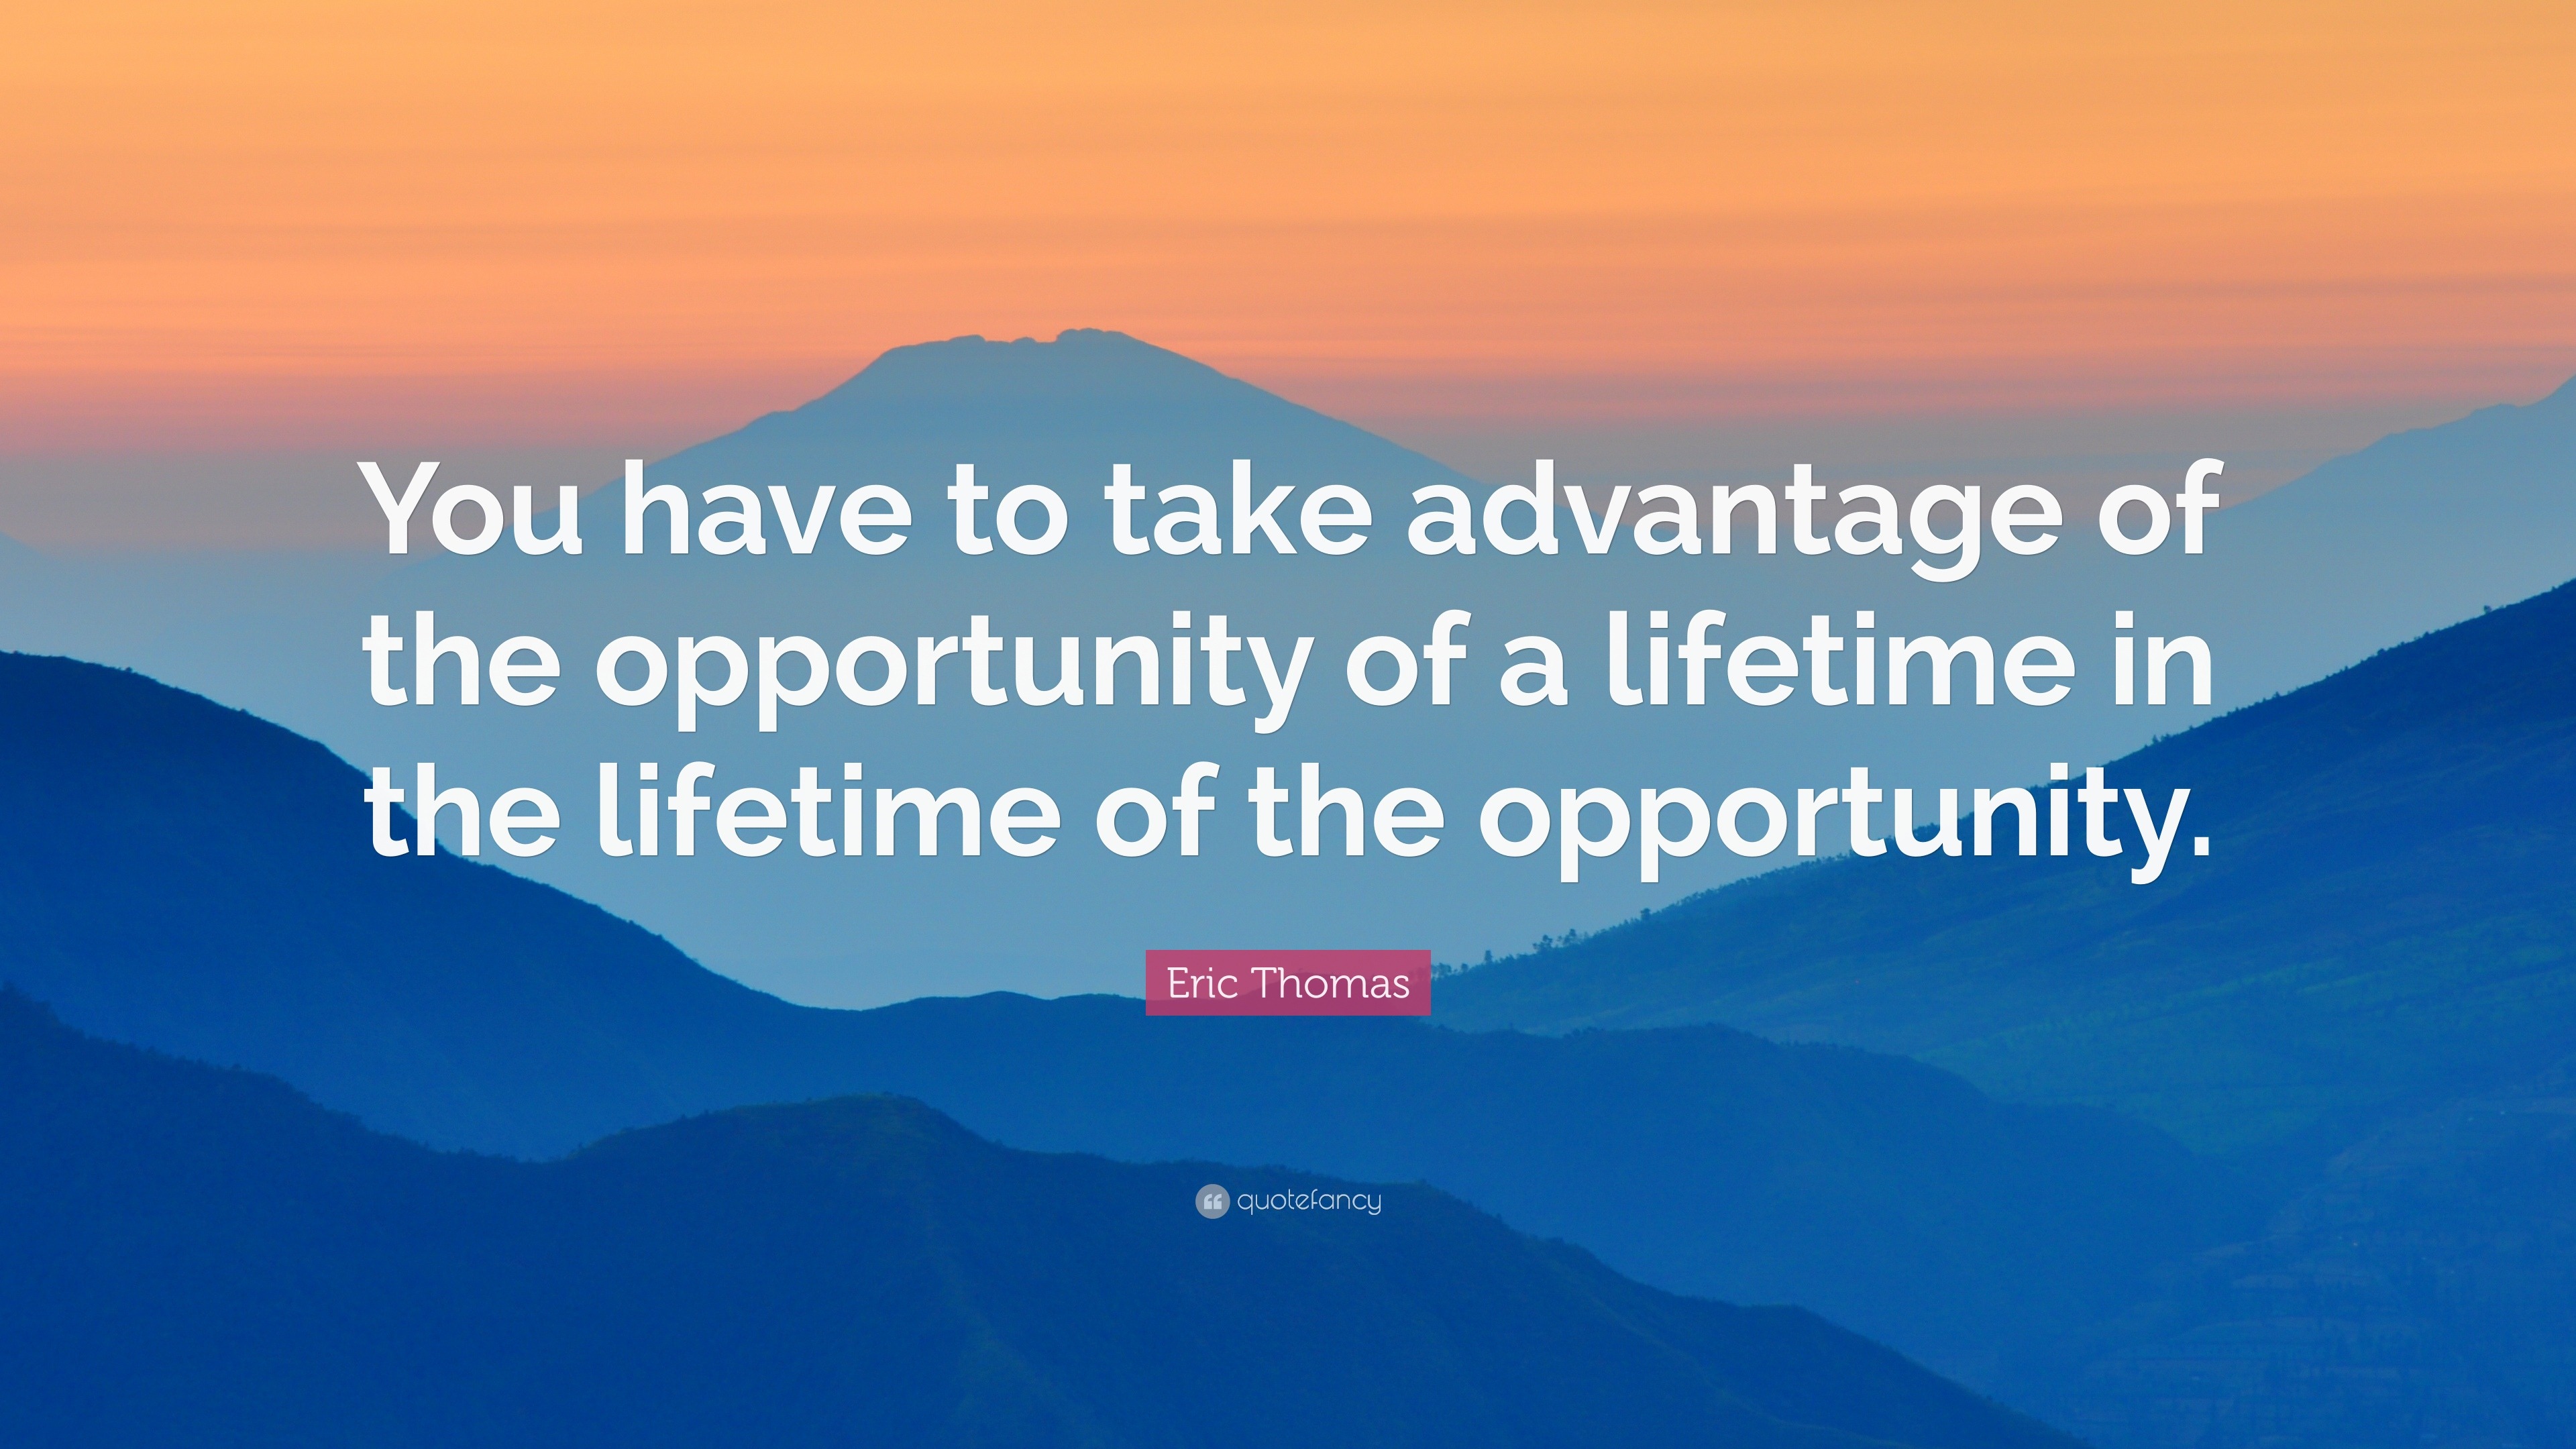 Opportunity Of A Lifetime Quote - oppojulll